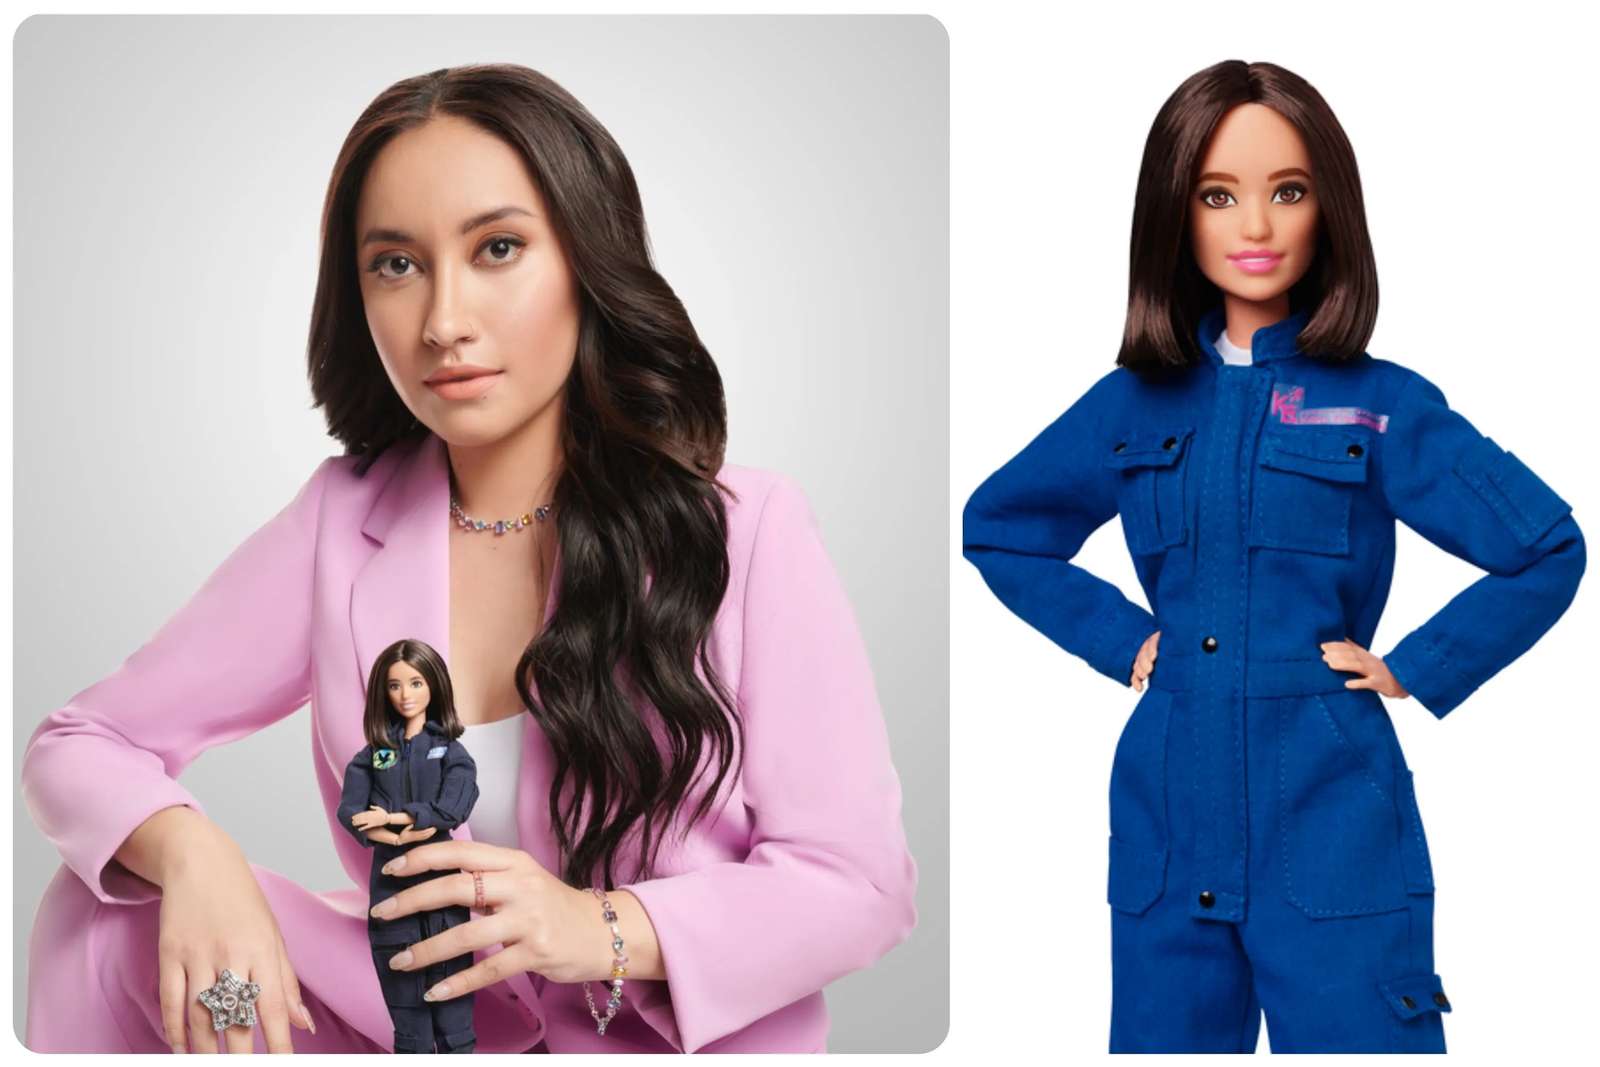 Who has a Barbie doll after them? puzzle online from photo